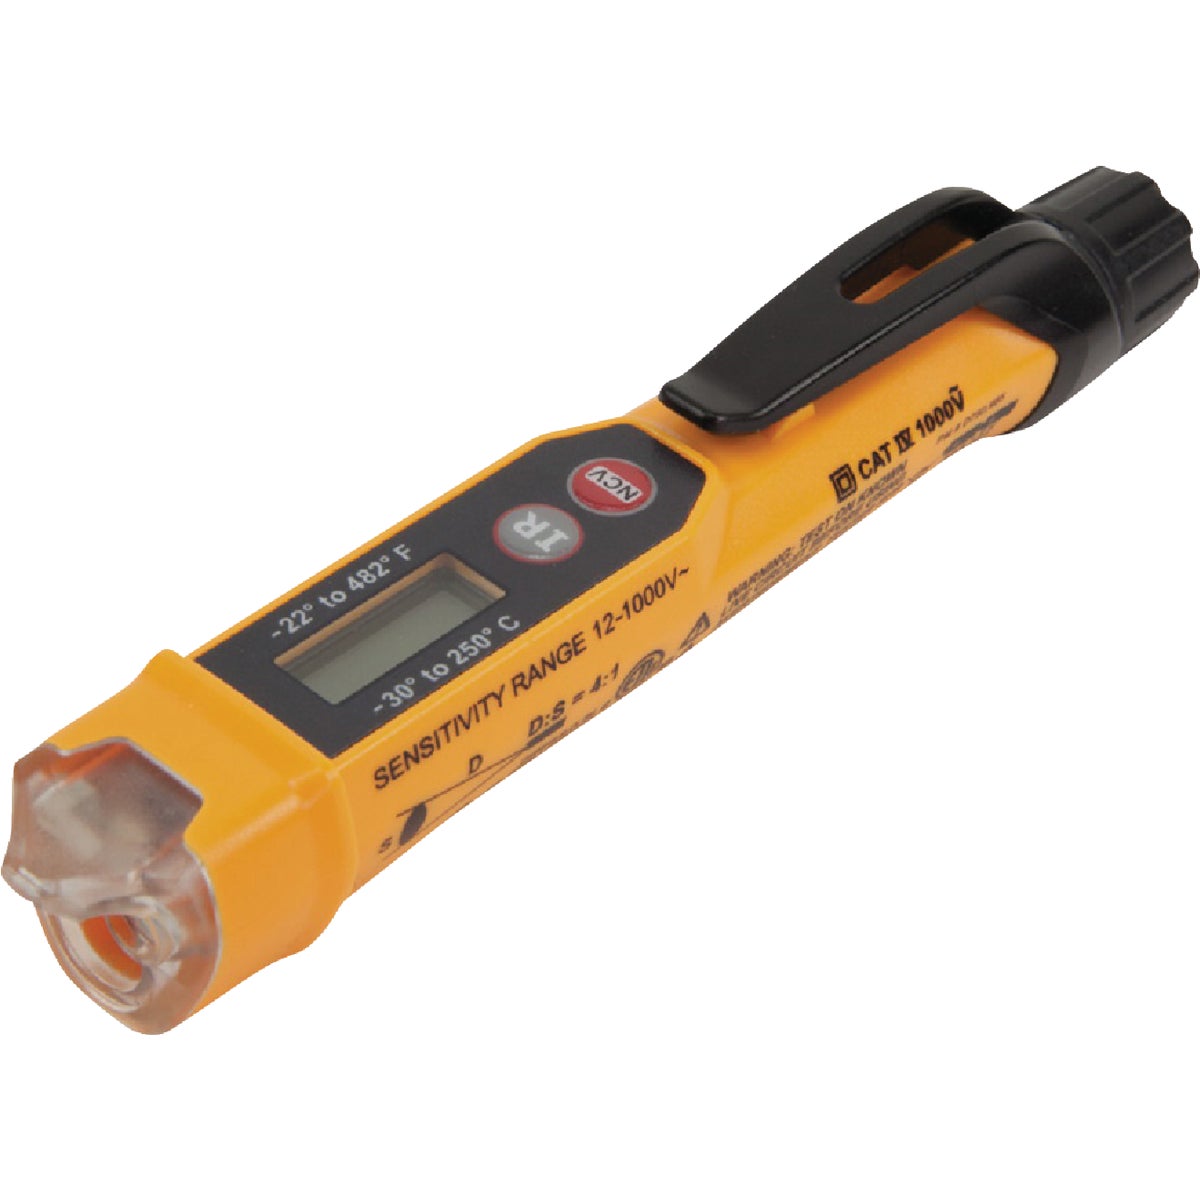 Klein Non-Contact Voltage Tester with Thermometer